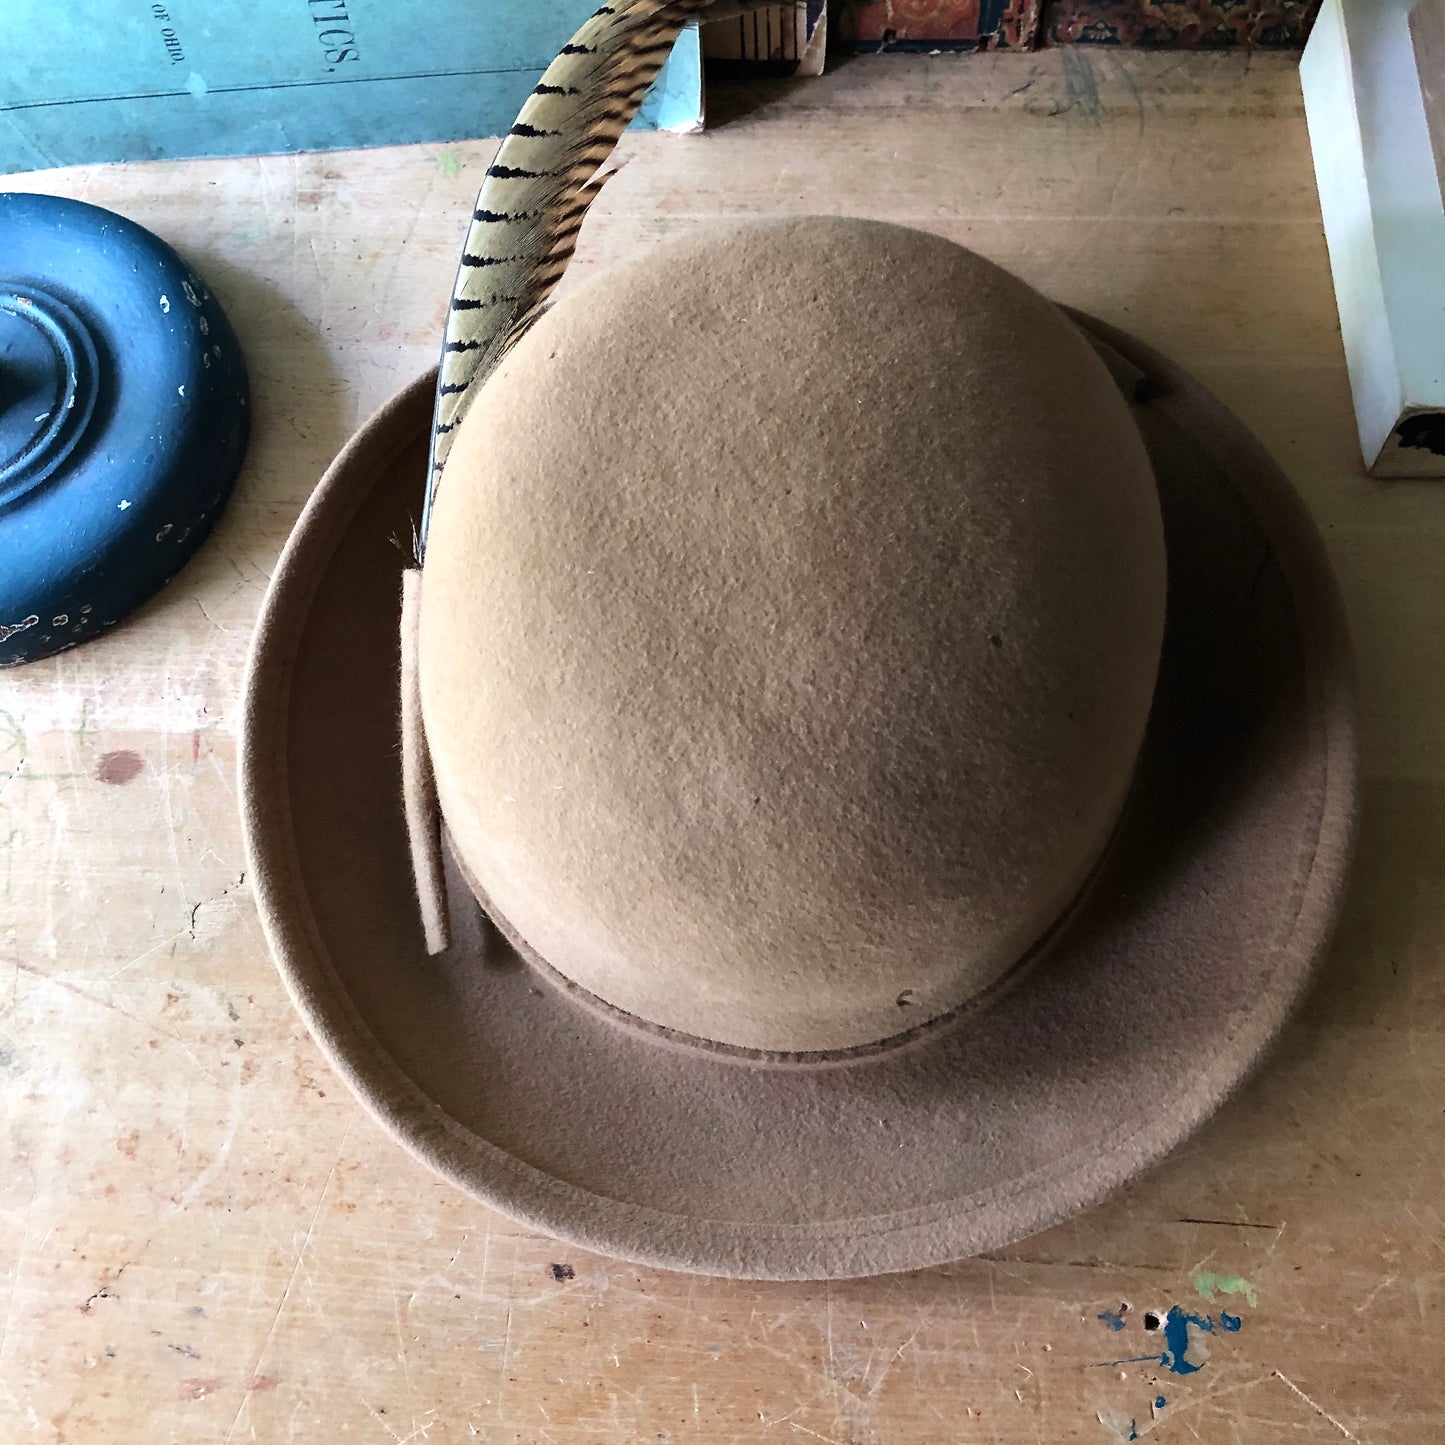 Tan Wool Bowler Hat with Feathers (c.1960s)